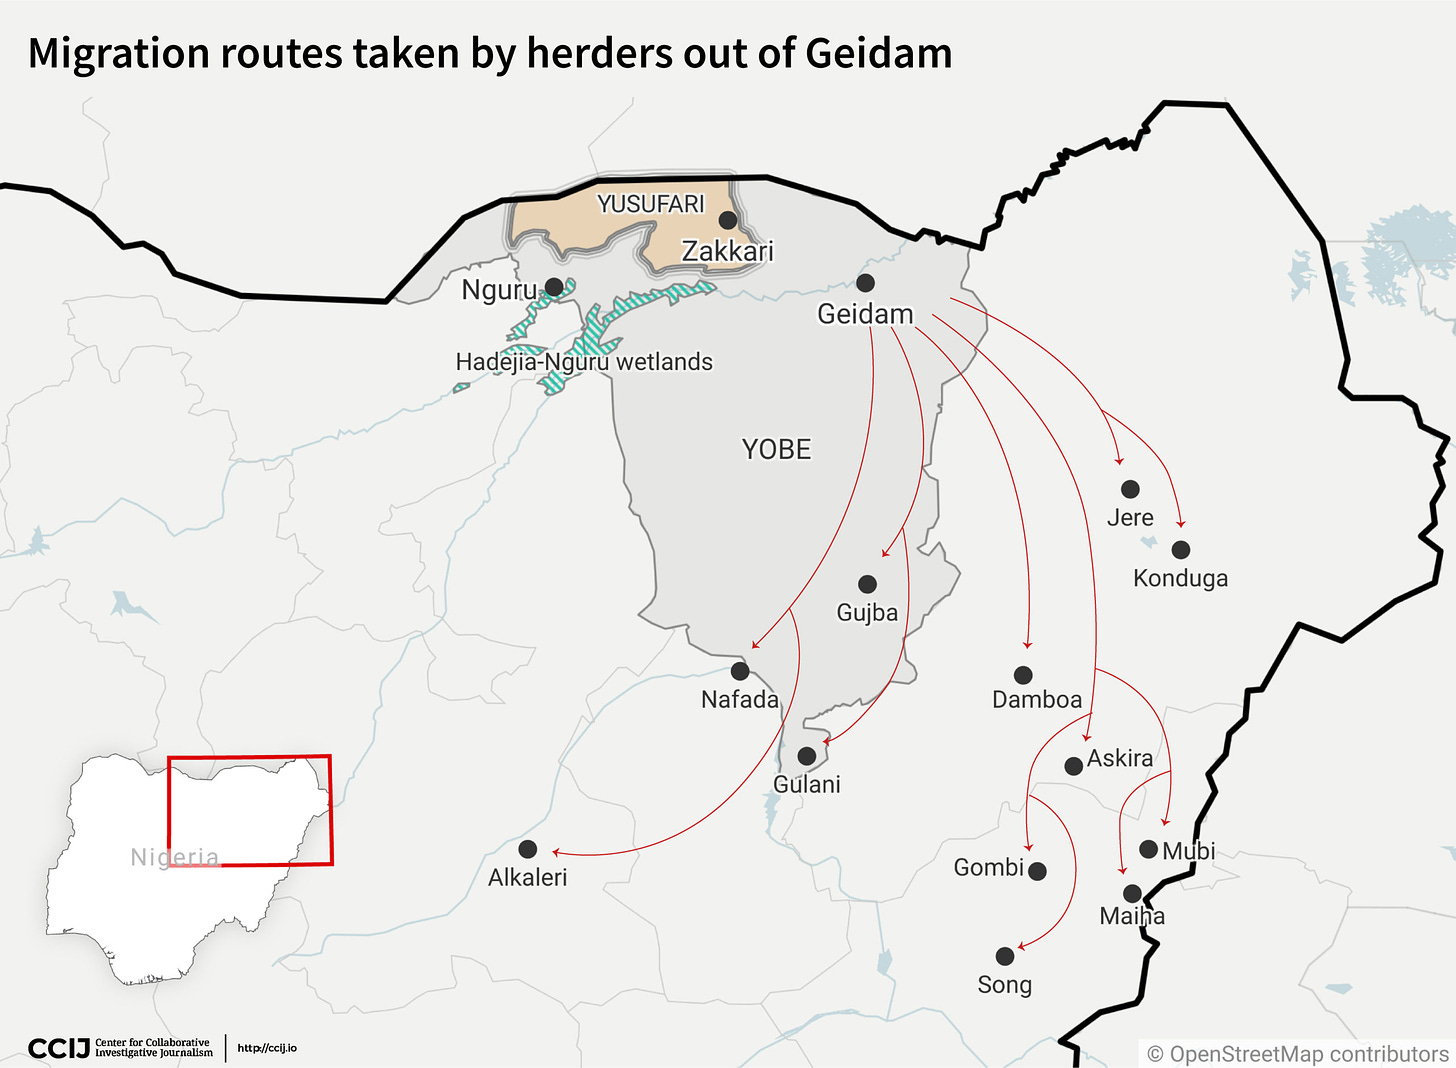 Migration routes taken by herders out of Geidam